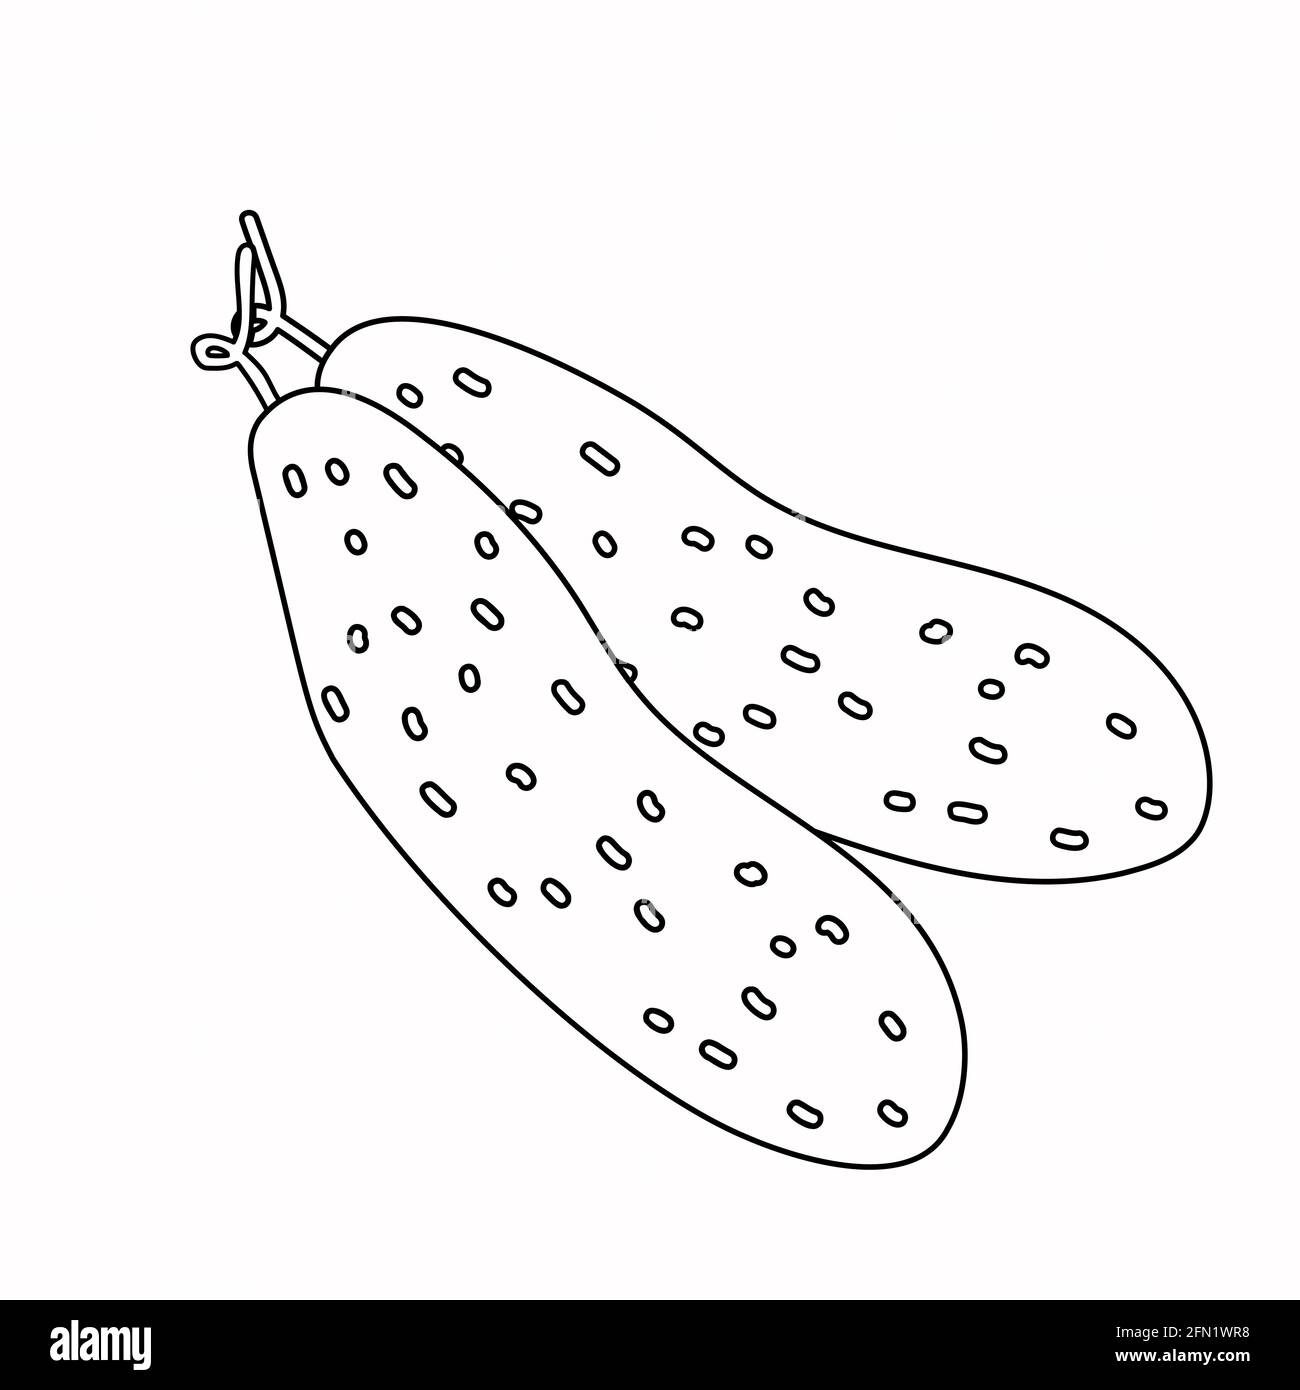 Cucumber coloring sheet black and white vector illustration Stock Vector